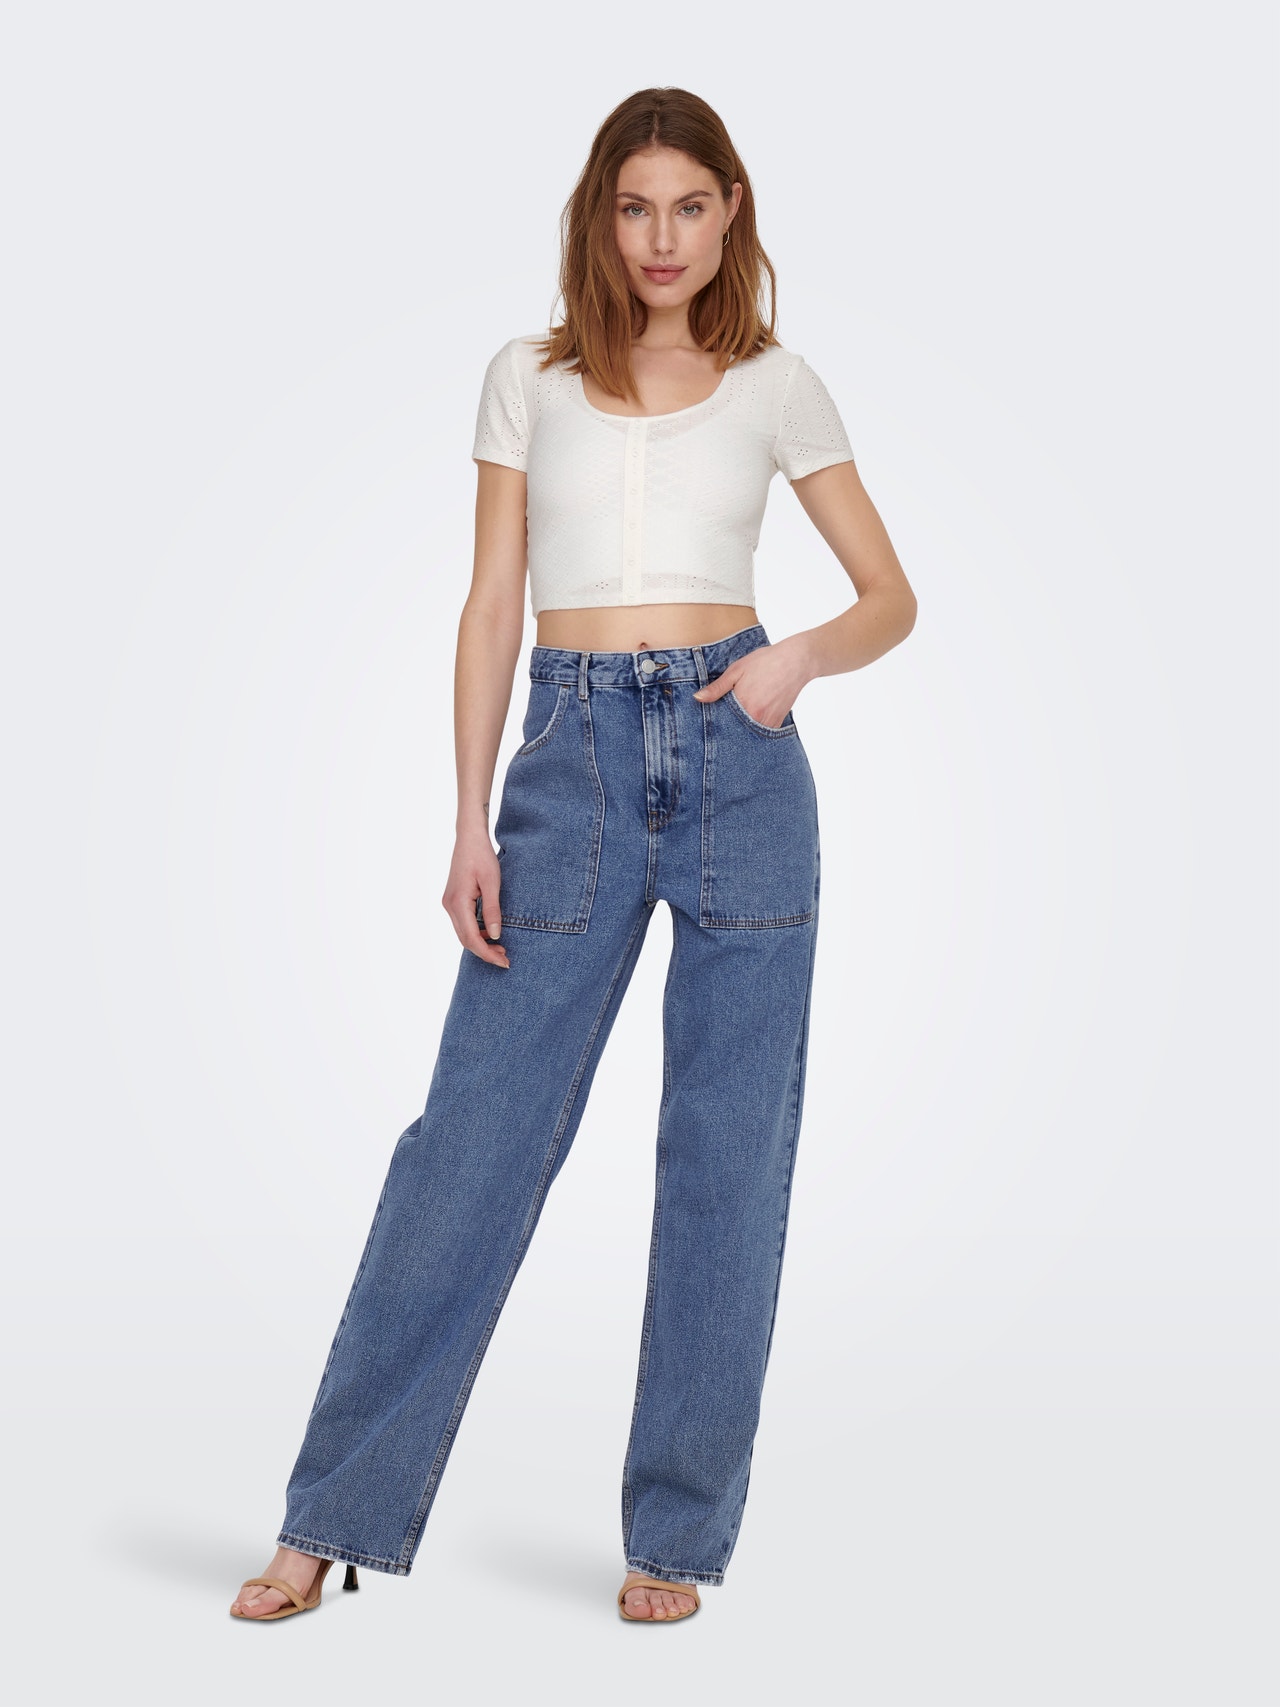 ONLY Cropped o-neck top -Cloud Dancer - 15289685